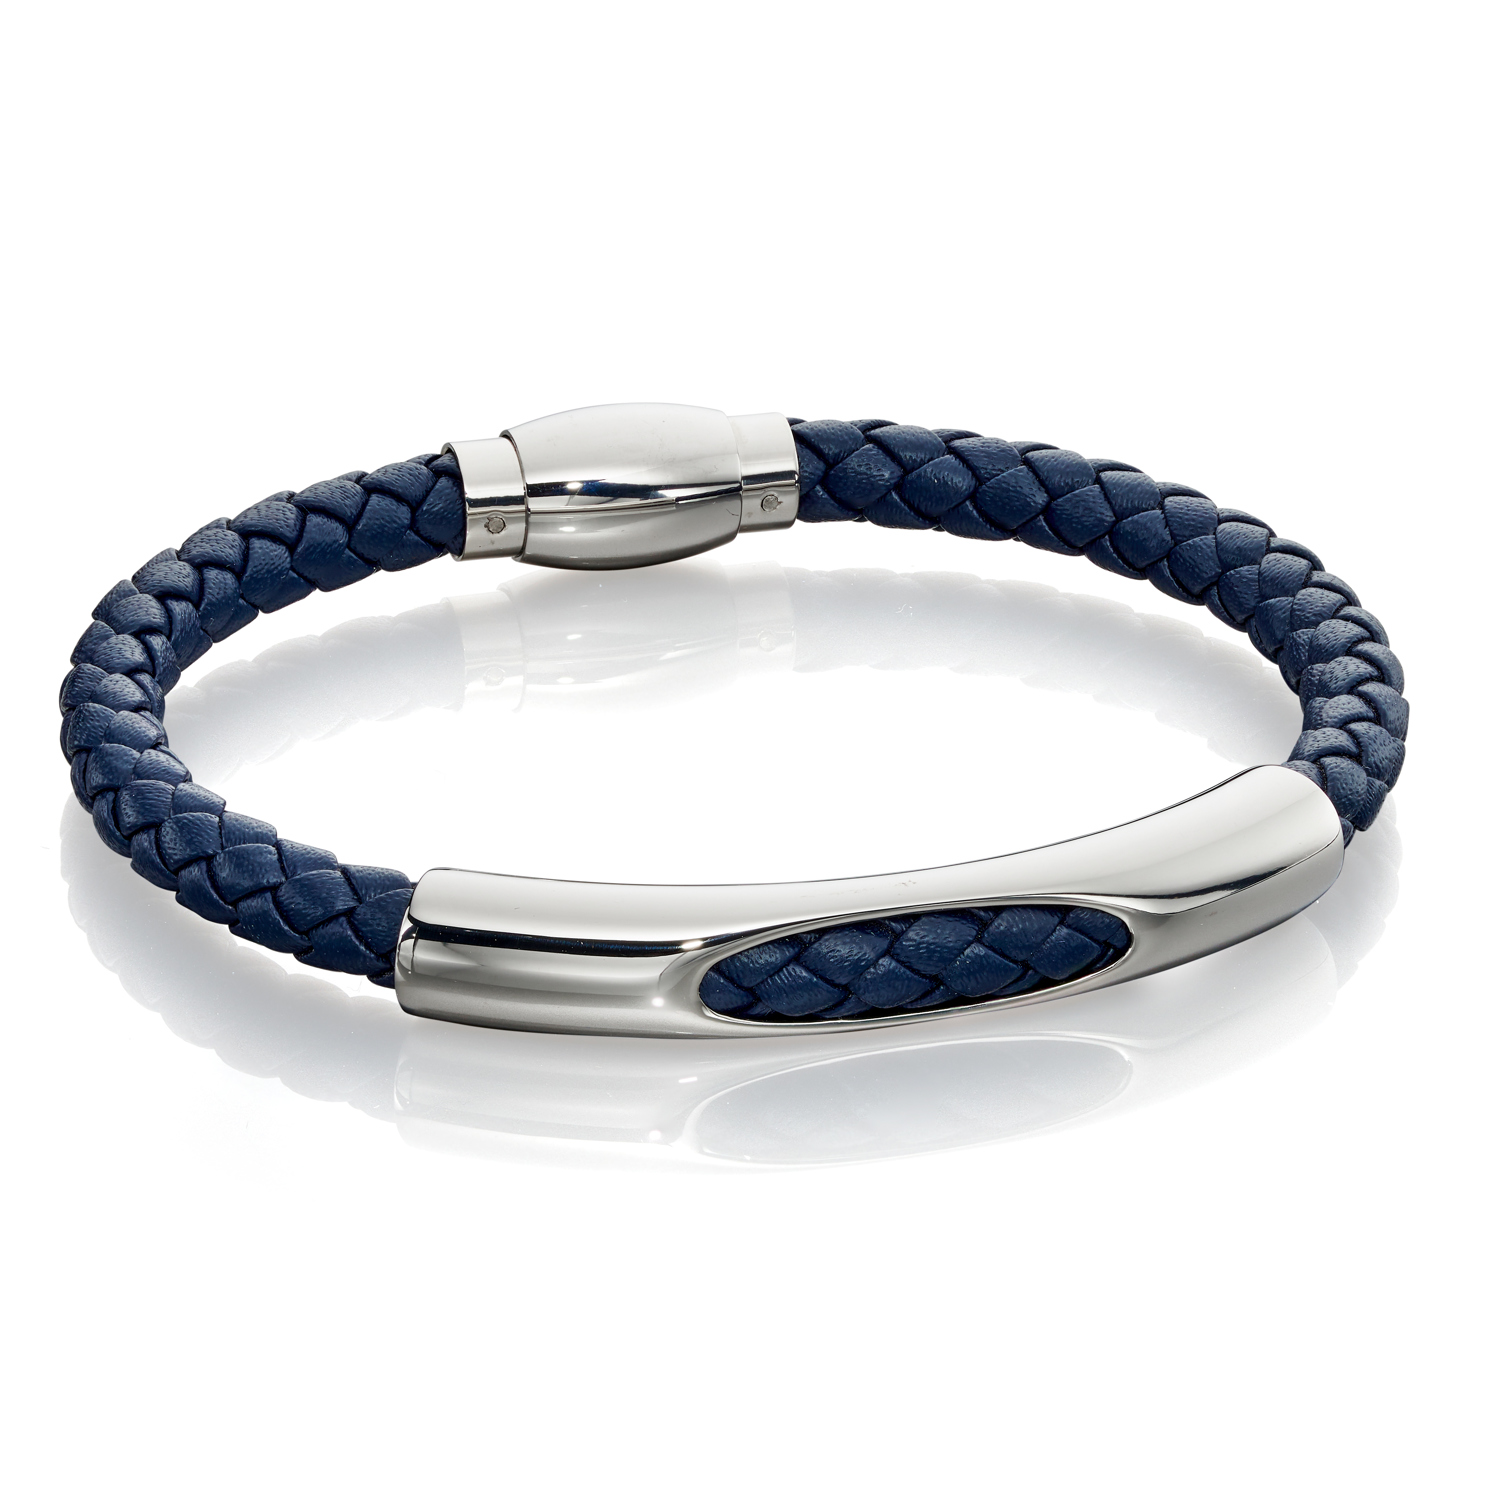 Dark blue leather bracelet - knitted twine with metal rollers and rubber  bands, magnetic fastening | Jewelry Eshop